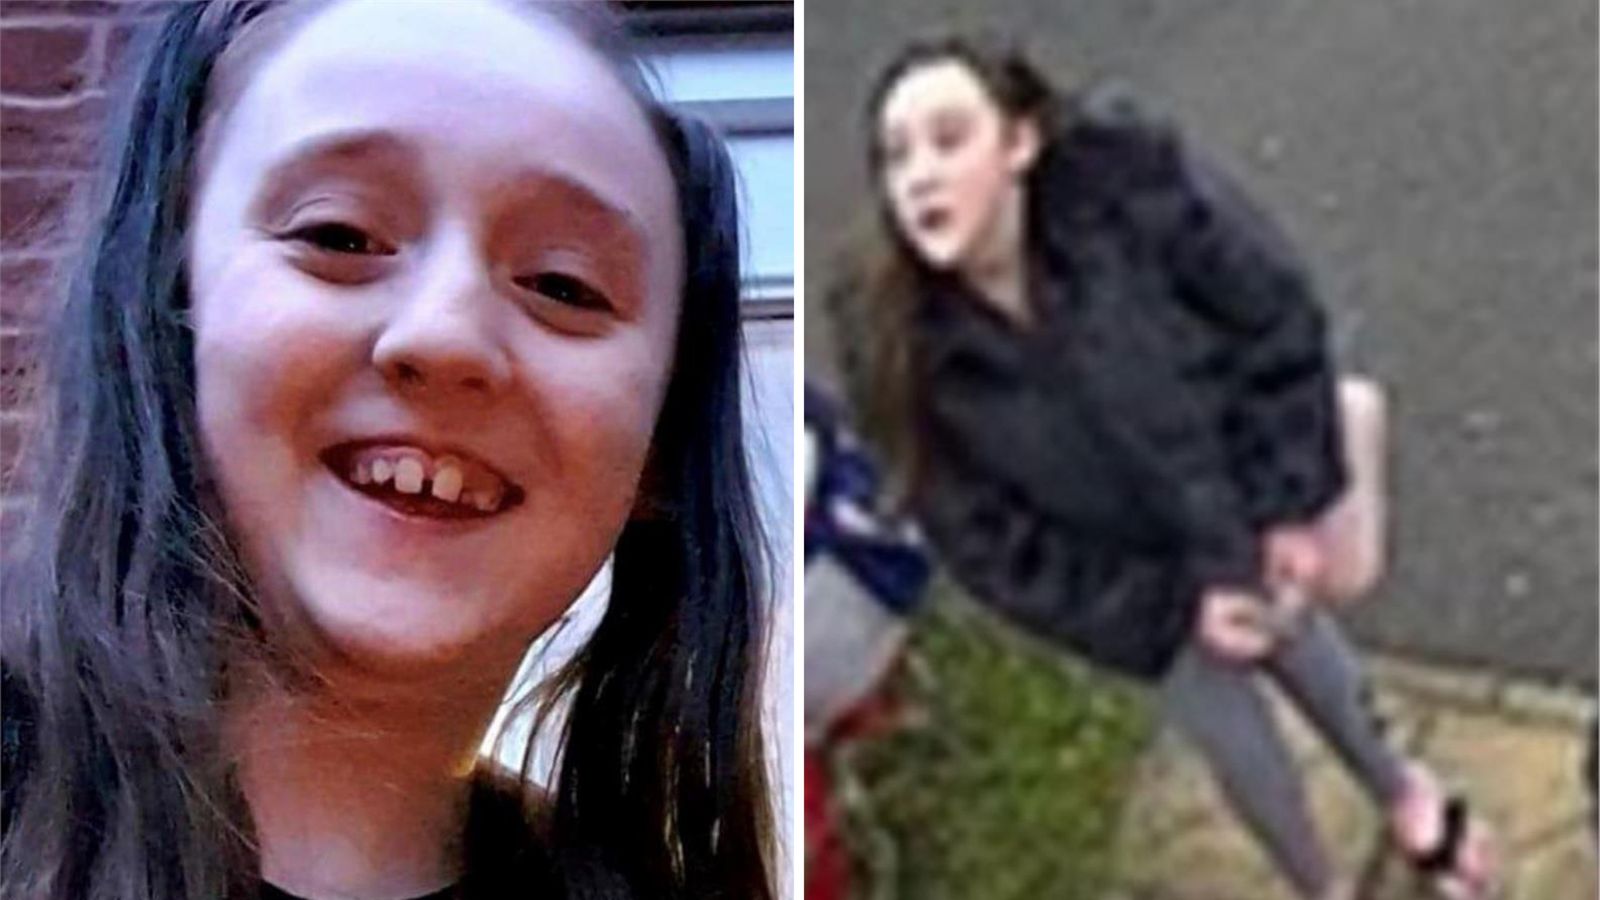 Leona Peach Police Searching For Missing 12 Year Old Appeal For Help To Find Her Father Uk 